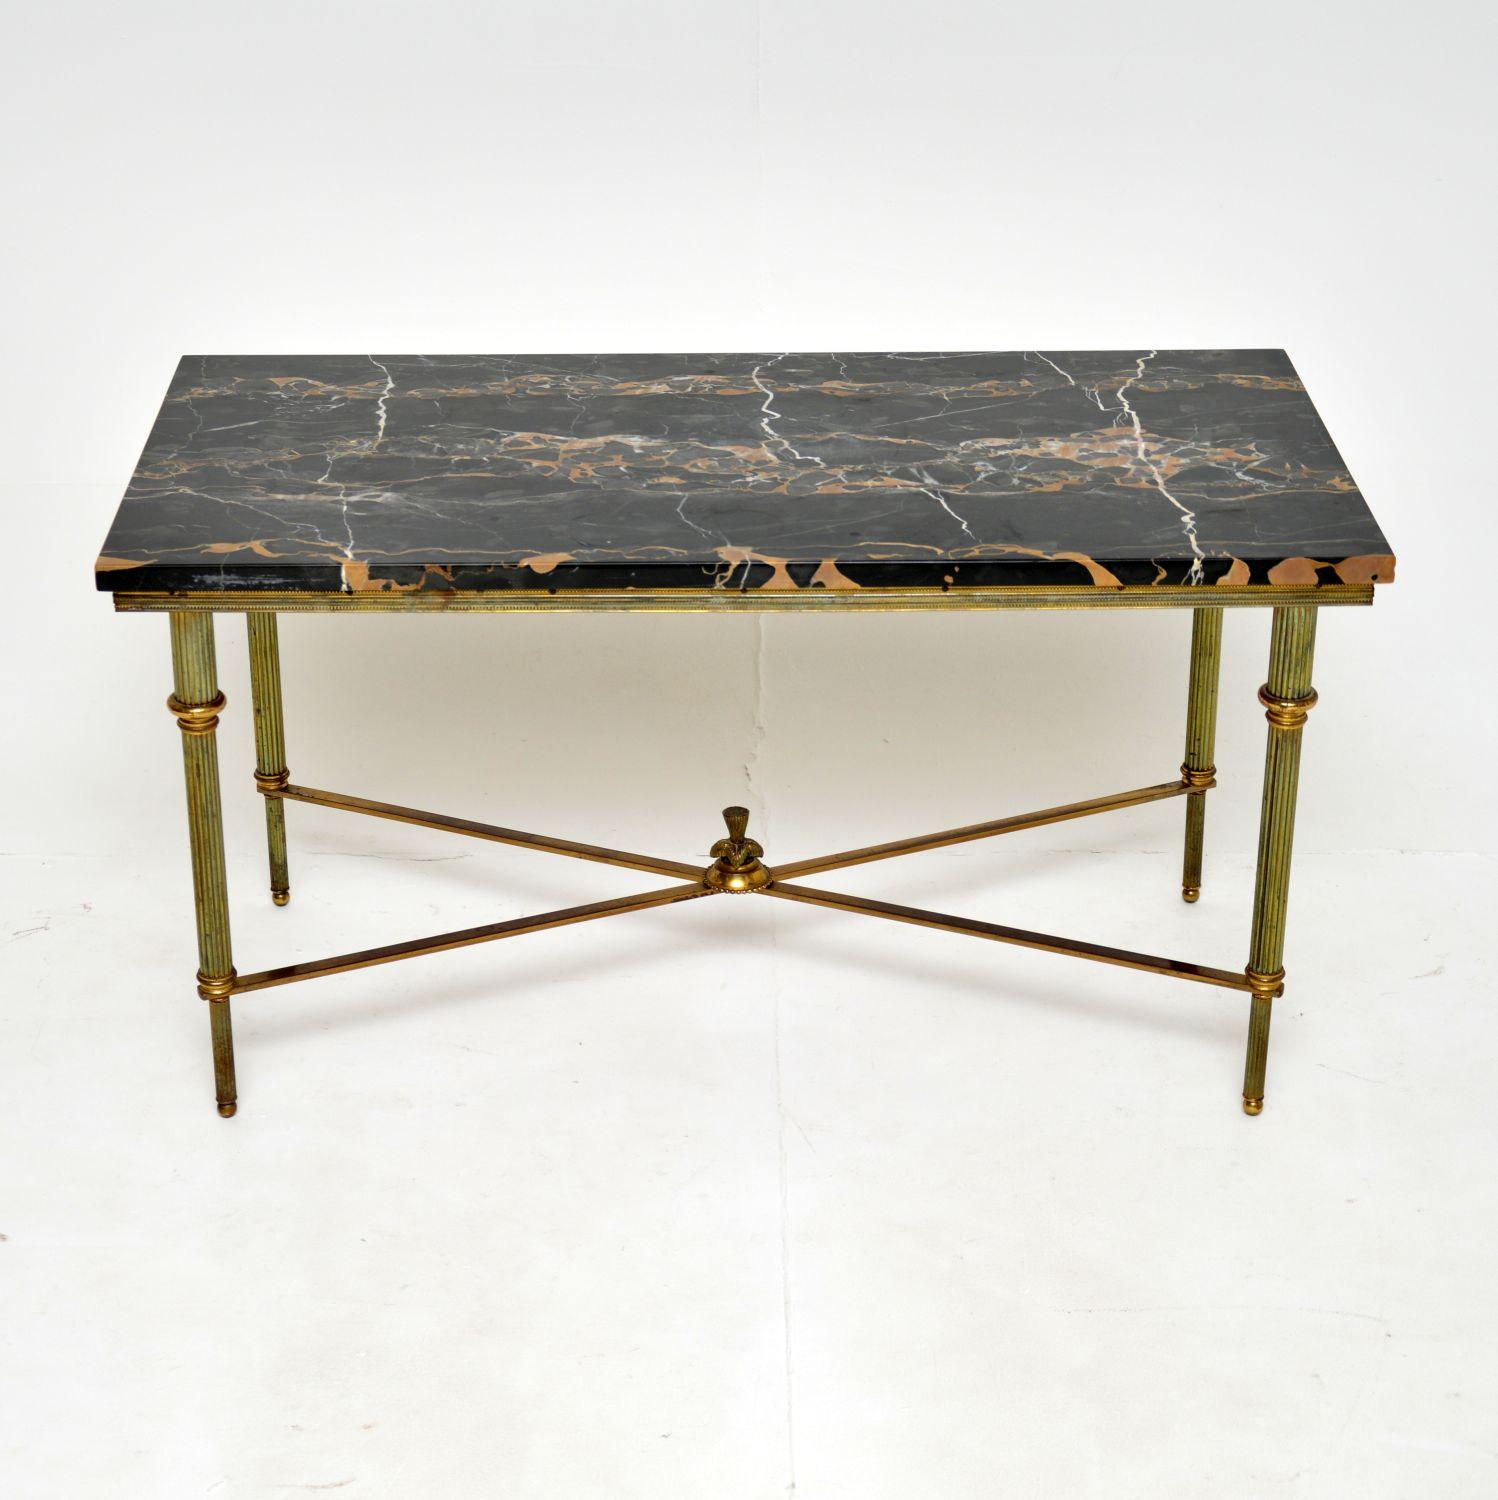 A stunning vintage French coffee table in solid brass and marble. This was made in France, it dates from around the 1930-50’s.

The quality is outstanding, this is one of the finest we’ve had. There are intricate brass details around the legs and